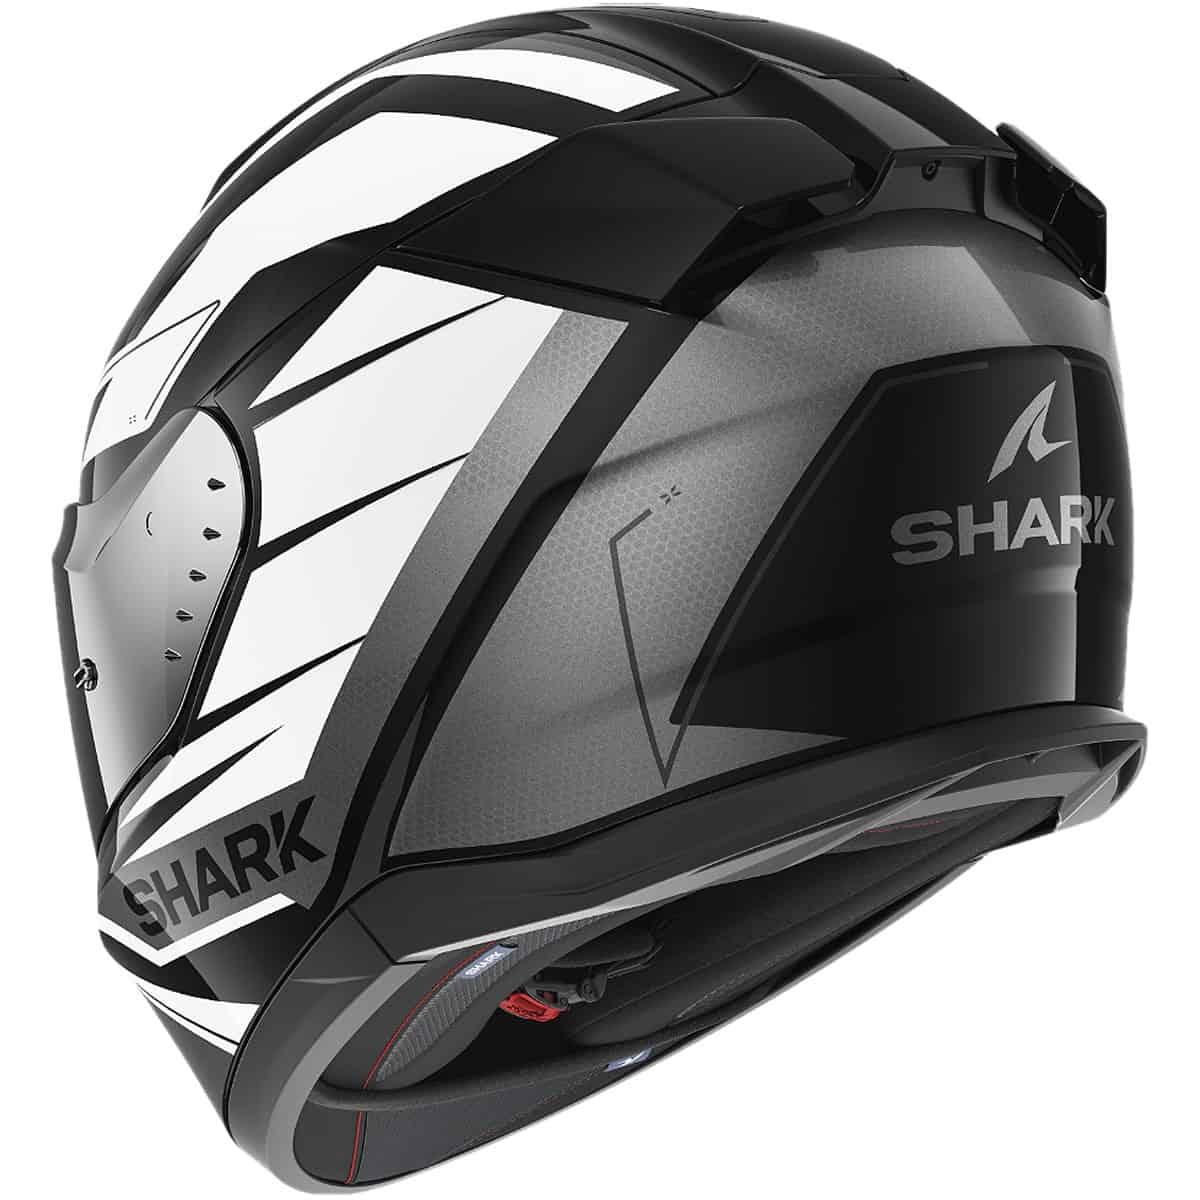 Get ready to take your ride to a whole new level with the Shark D-Skwal 3 full face helmet.  3